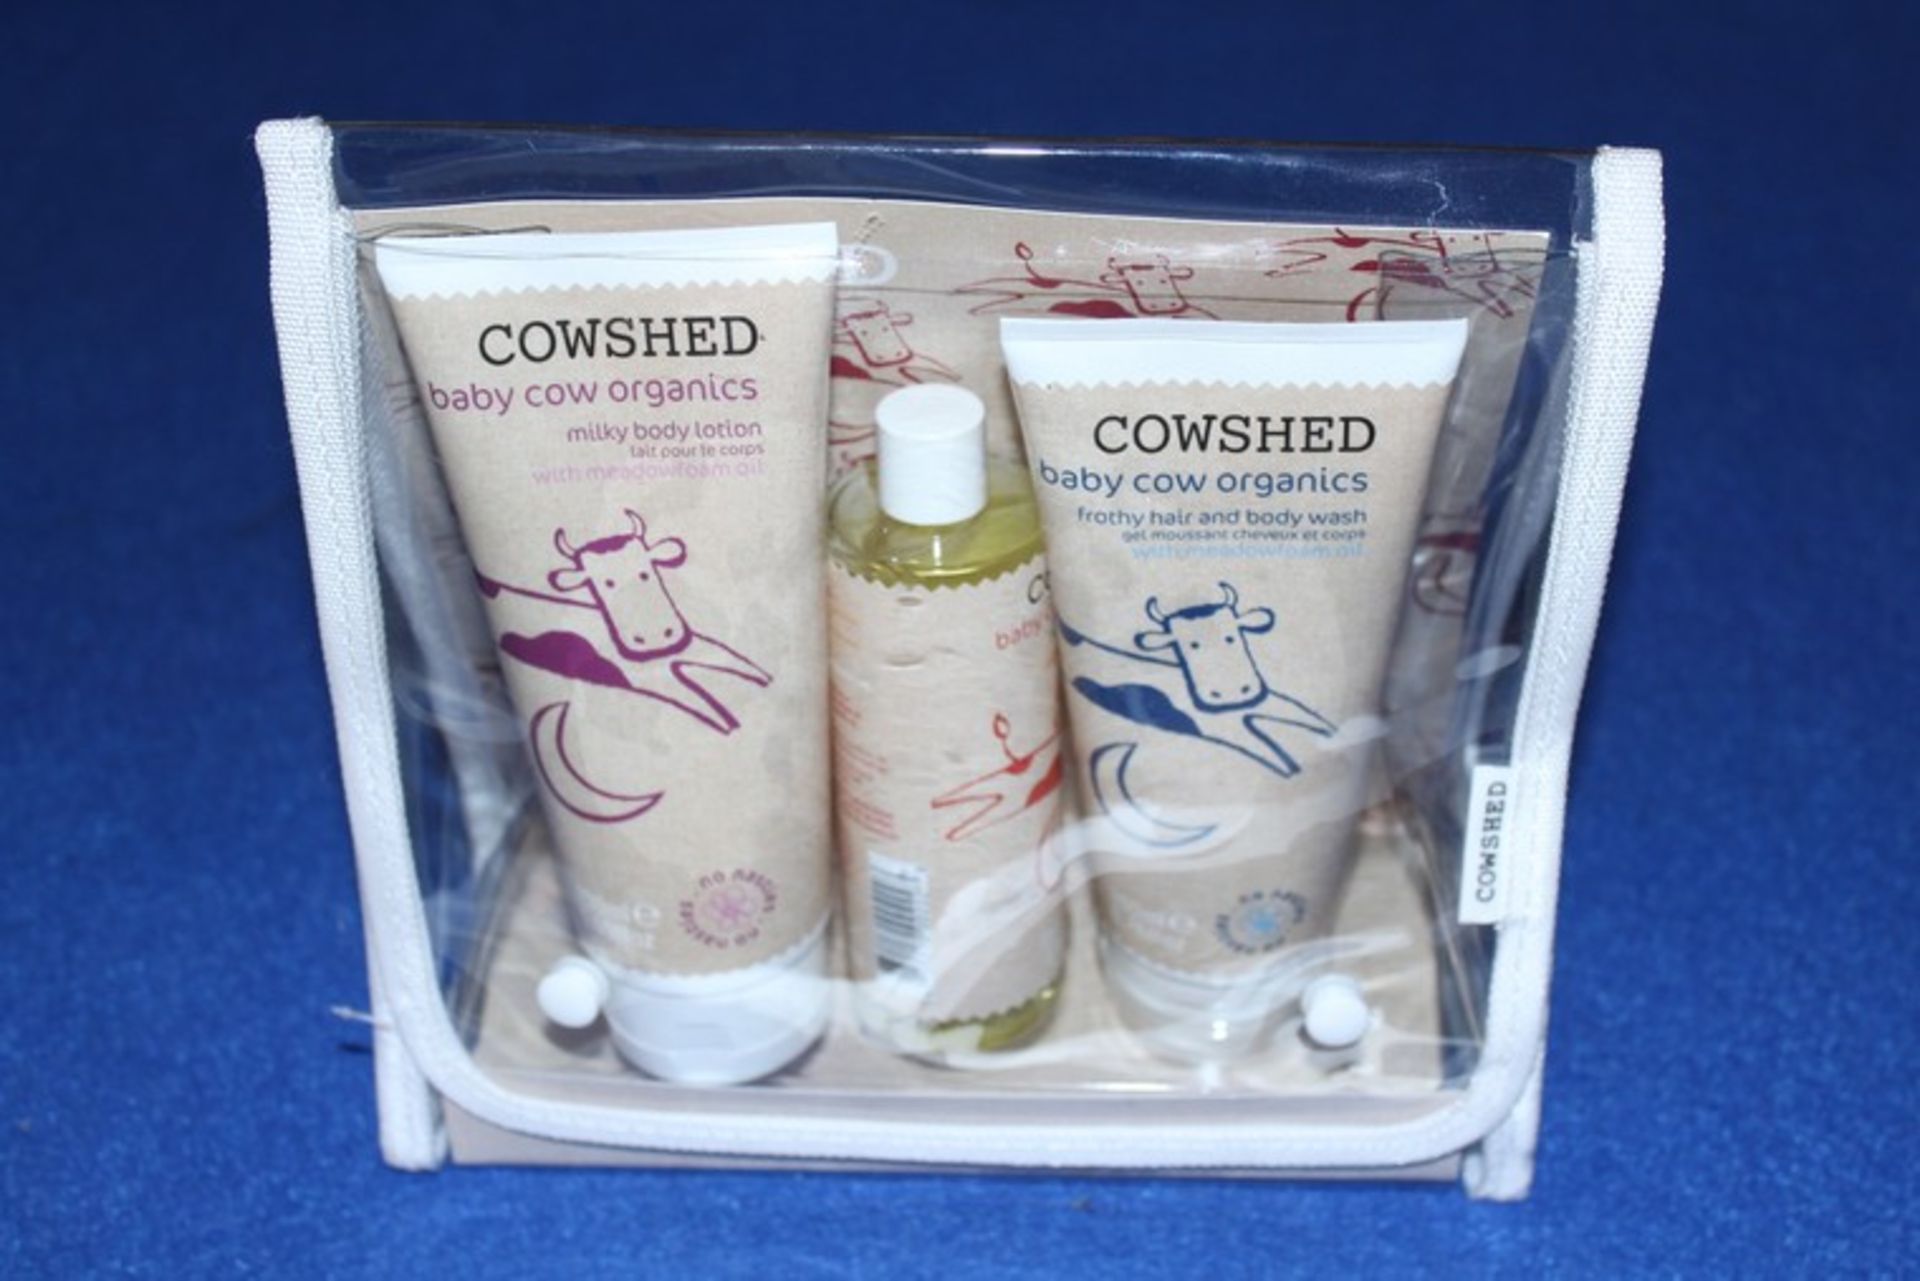 10 x COW SHED BABY GIFT SET TO INCLUDE MILK BODY LOTION, FROFFY HAIR AND BODY WASH AND MASSAGE